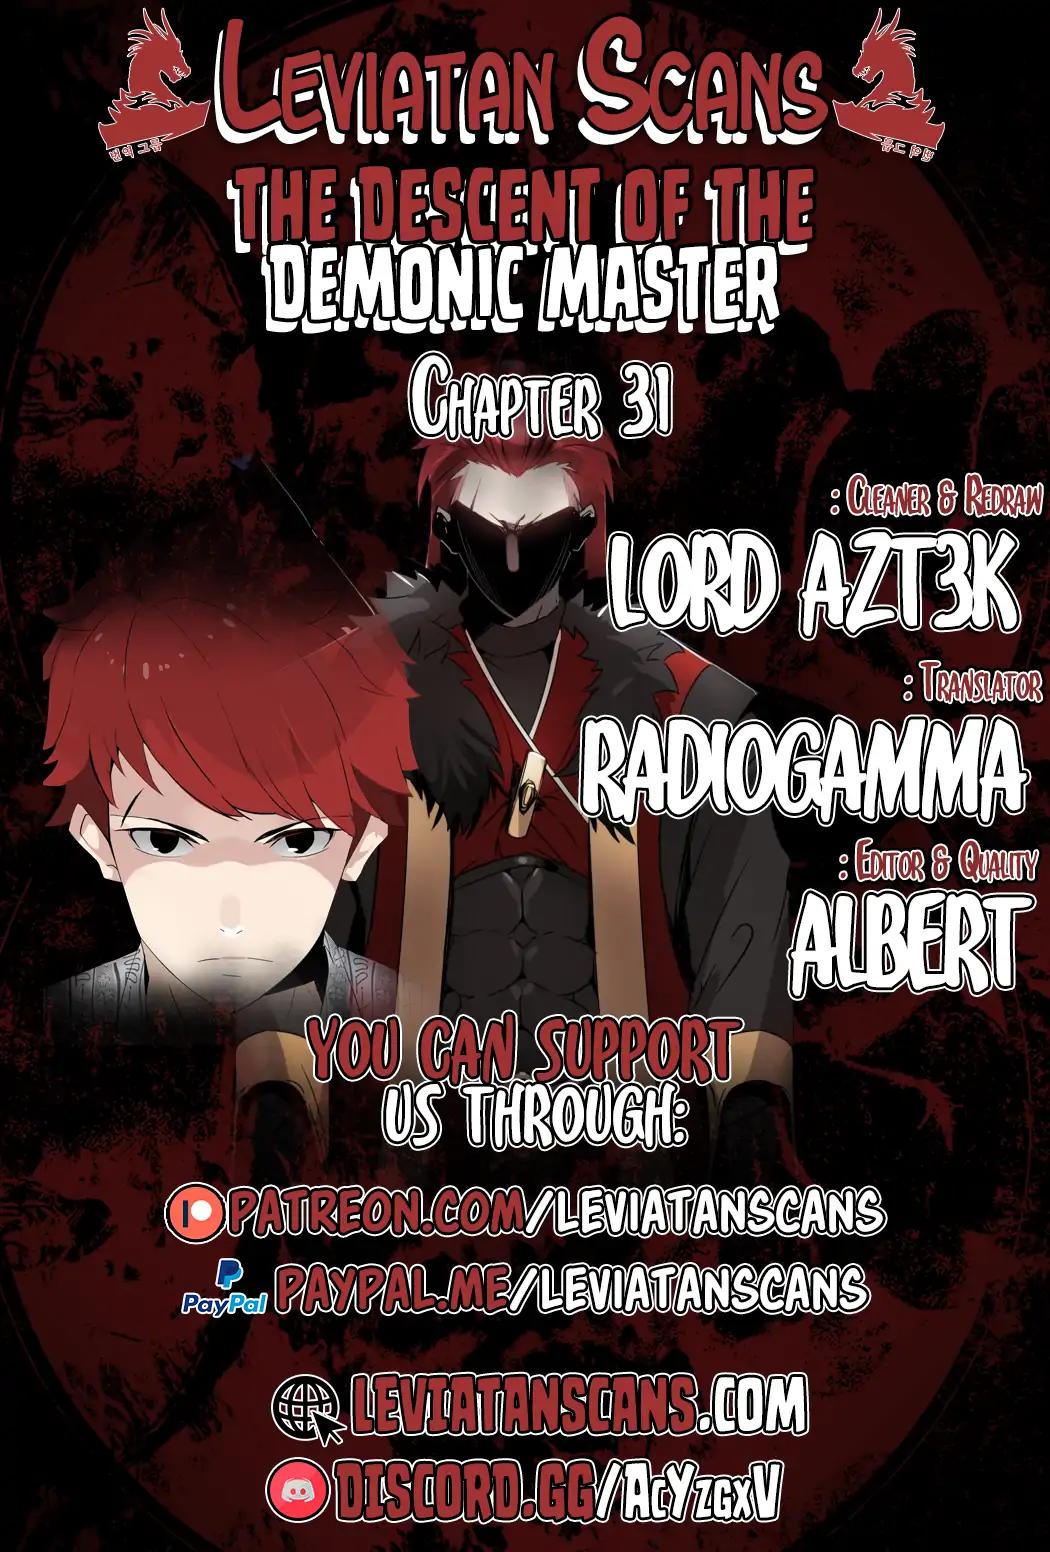 The Descent of the Demonic Master Chapter 31